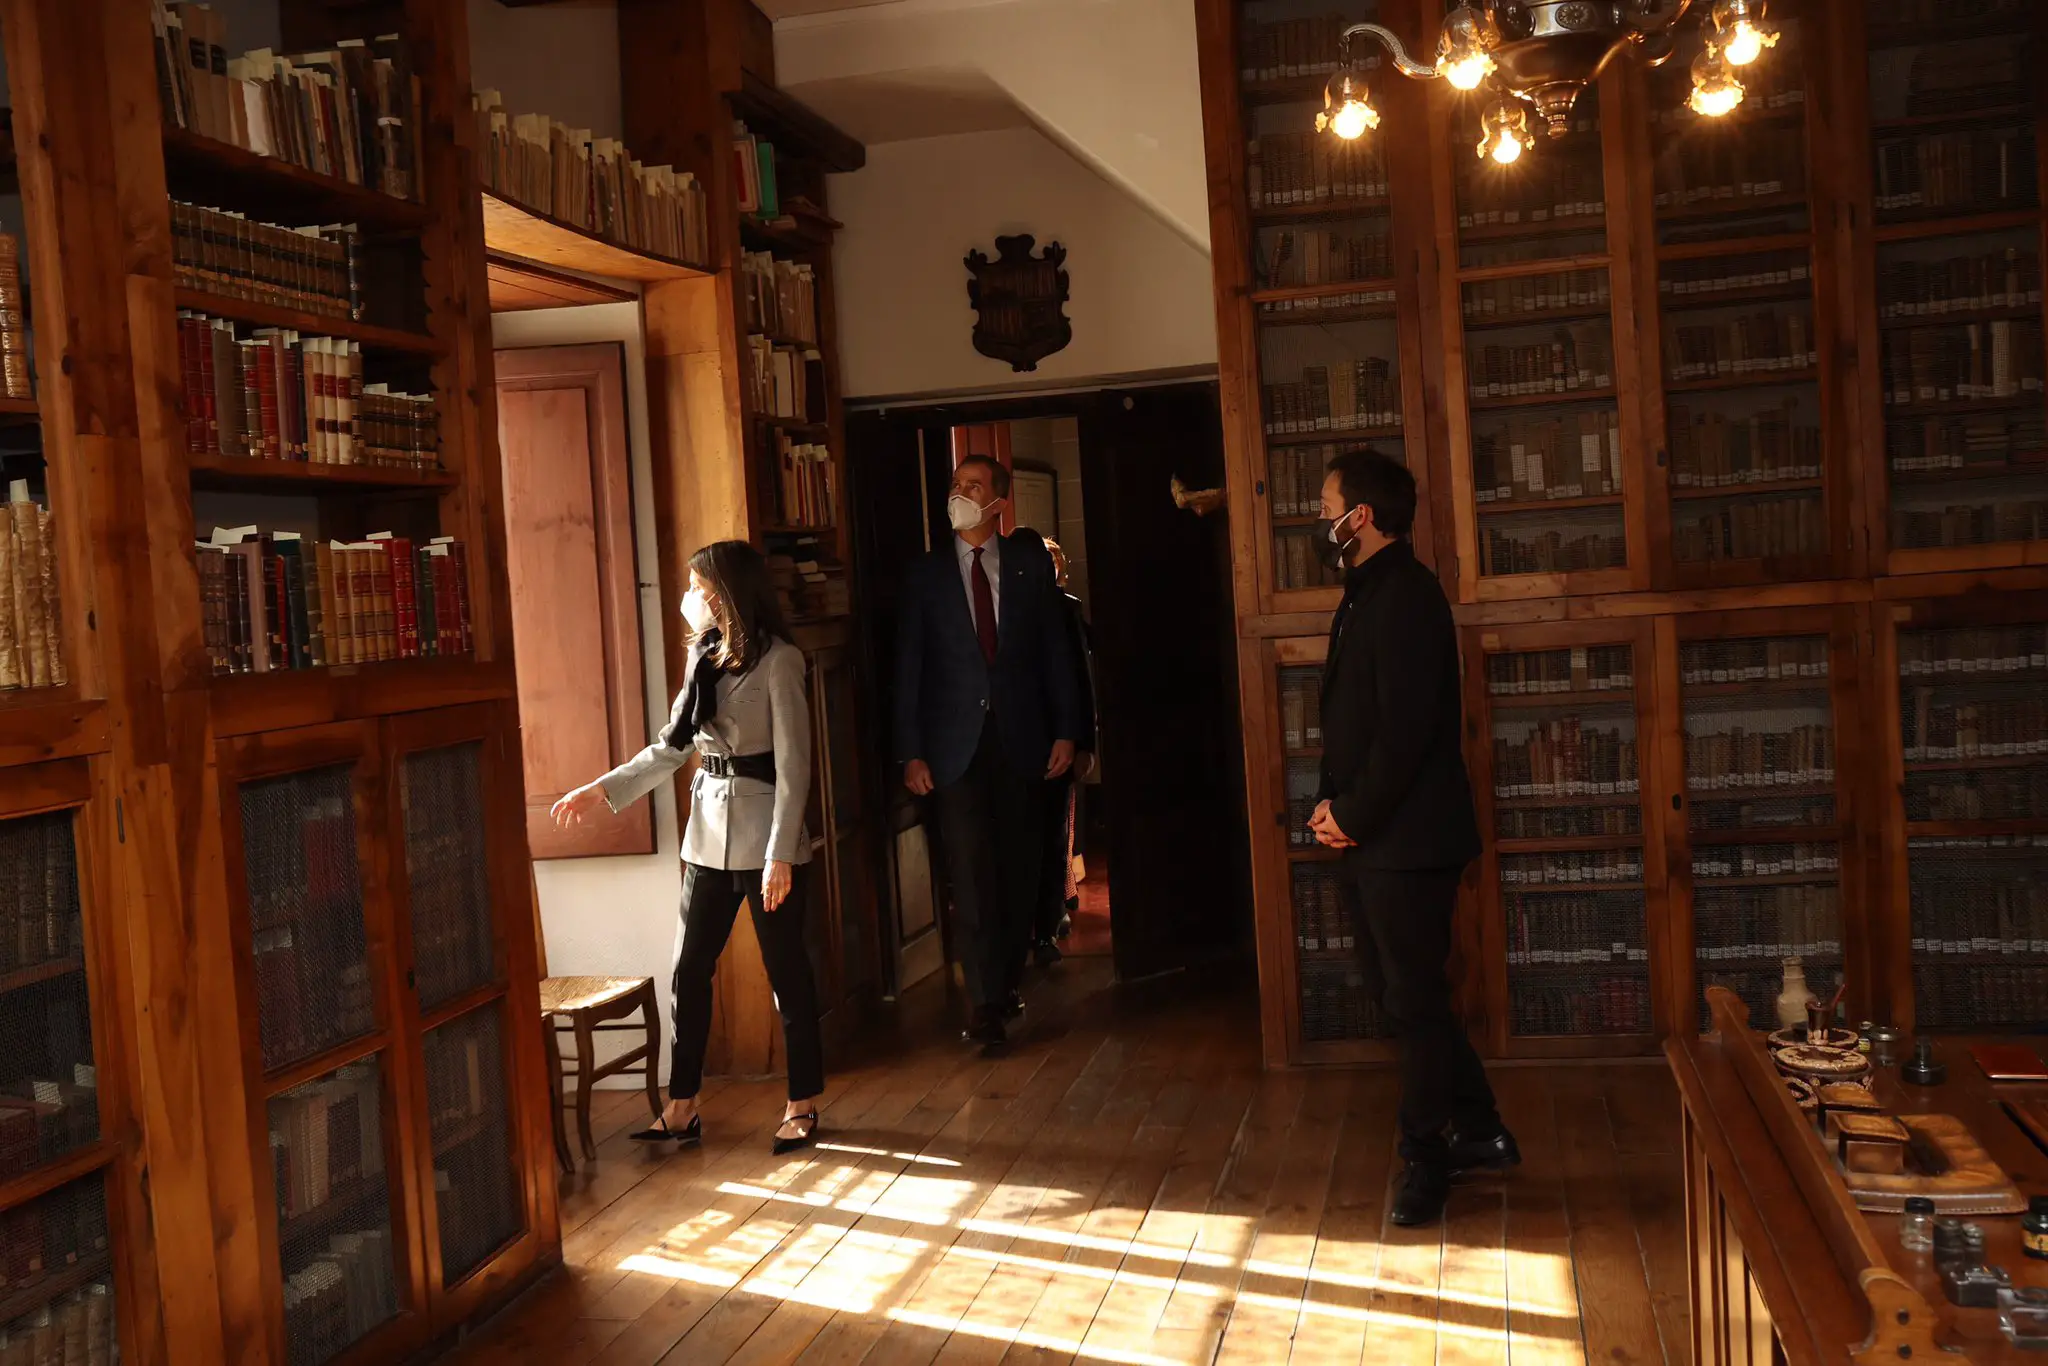 King Felipe and Queen Letizia visited Casa Museo d'Areny-Plandolit